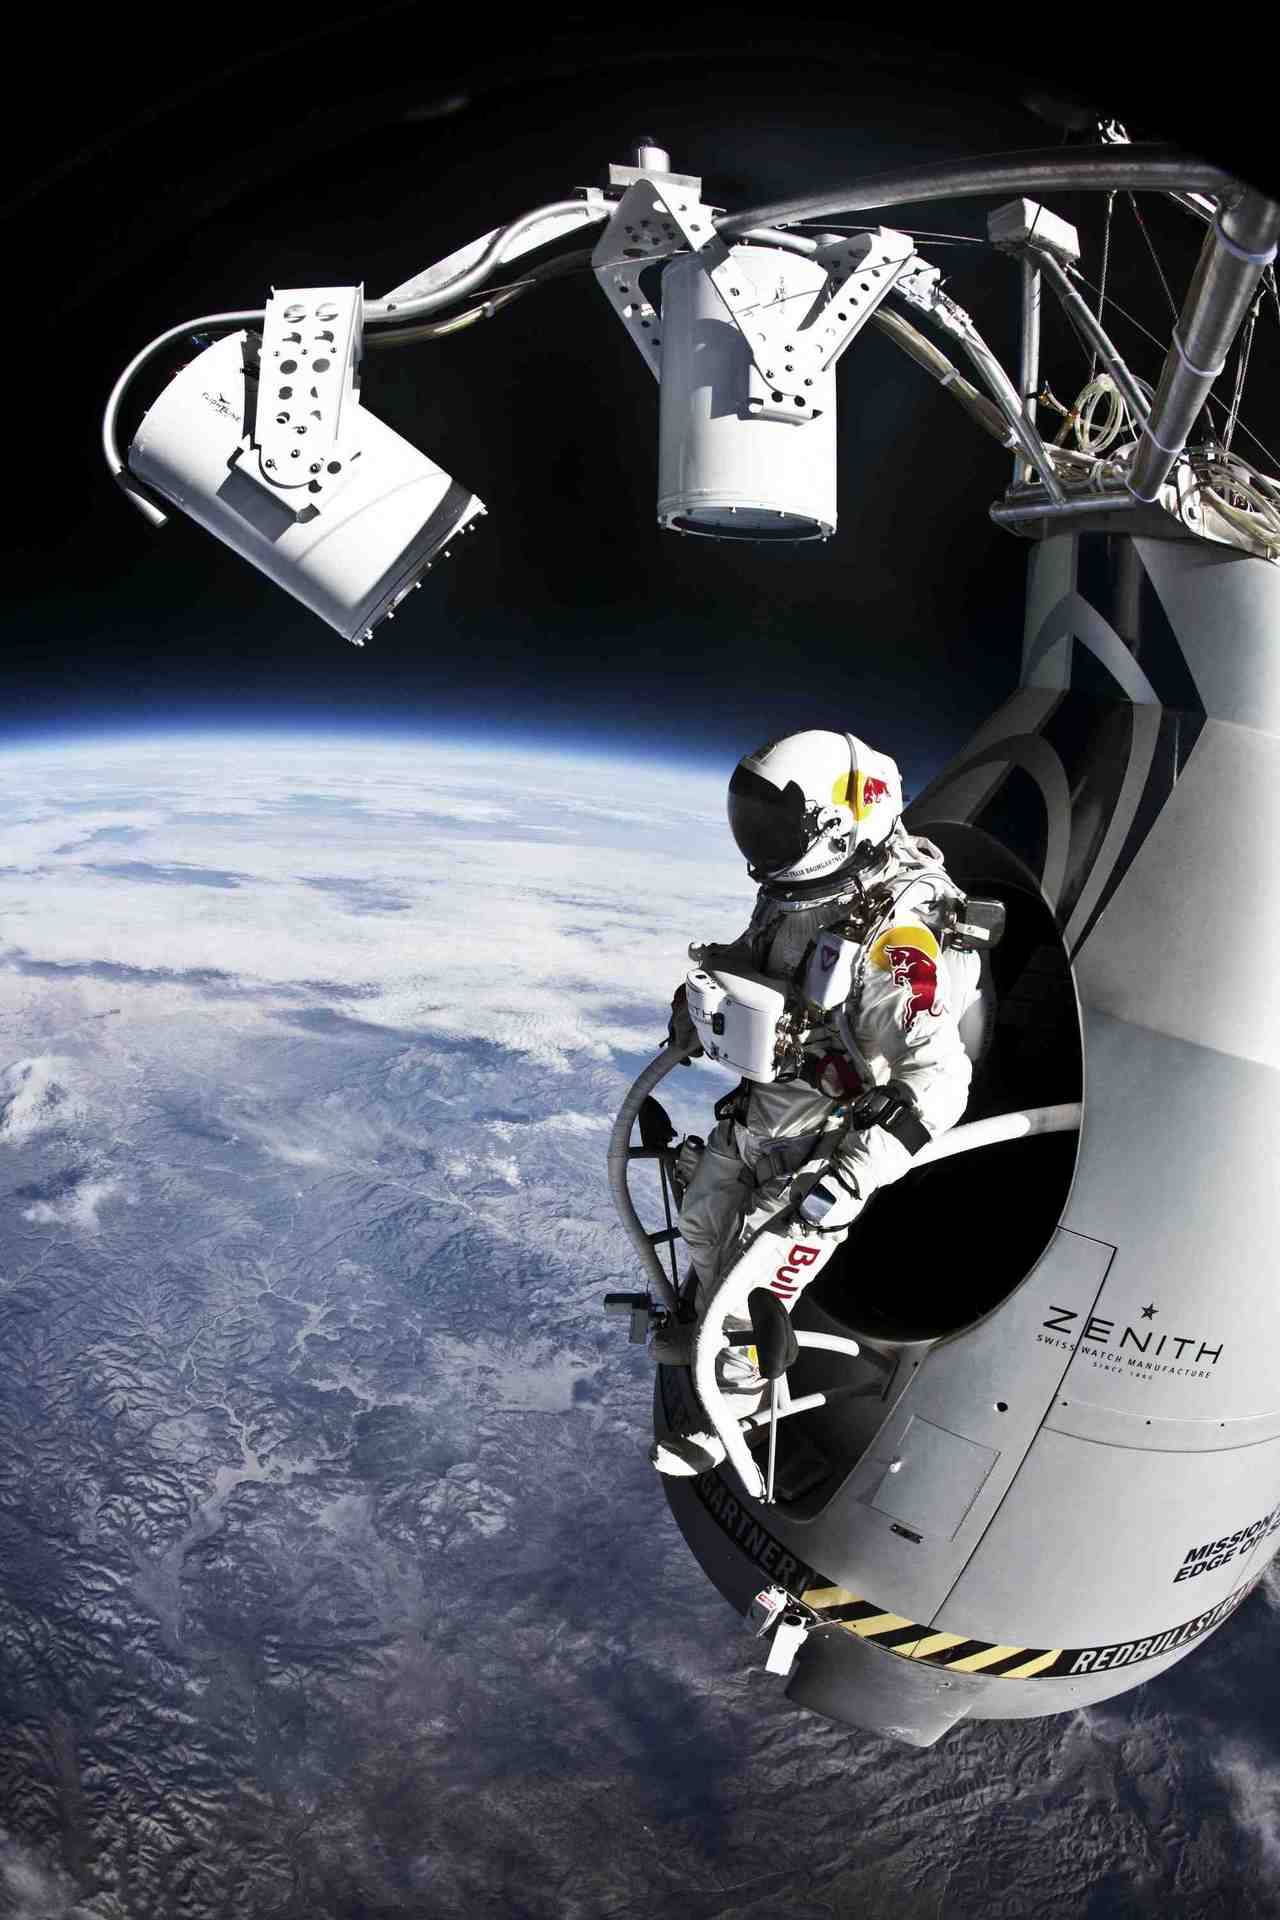 Felix during the 2nd manned test jump